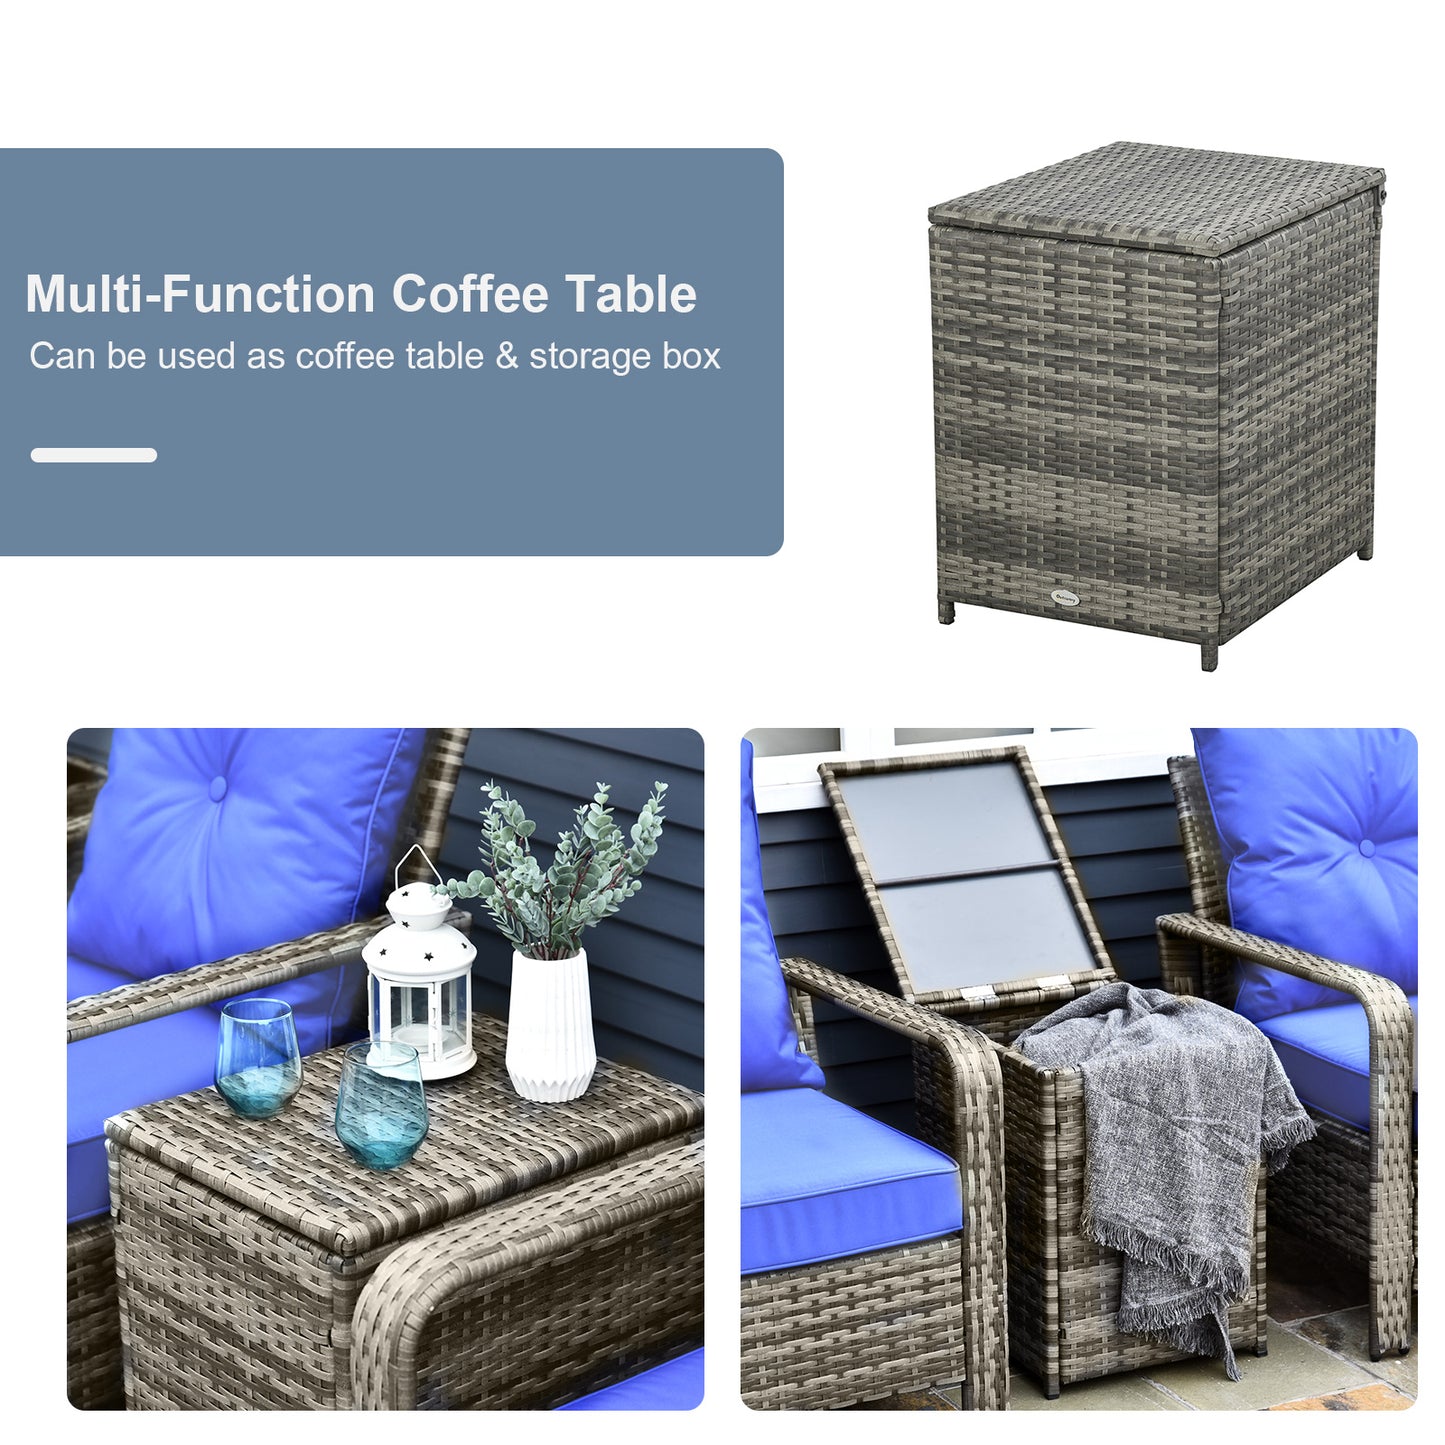 Outsunny 3 pcs PE Rattan Wicker Garden Furniture Patio Bistro Set Weave Conservatory Sofa Storage Table and Chairs Set Blue Cushion Grey Wicker